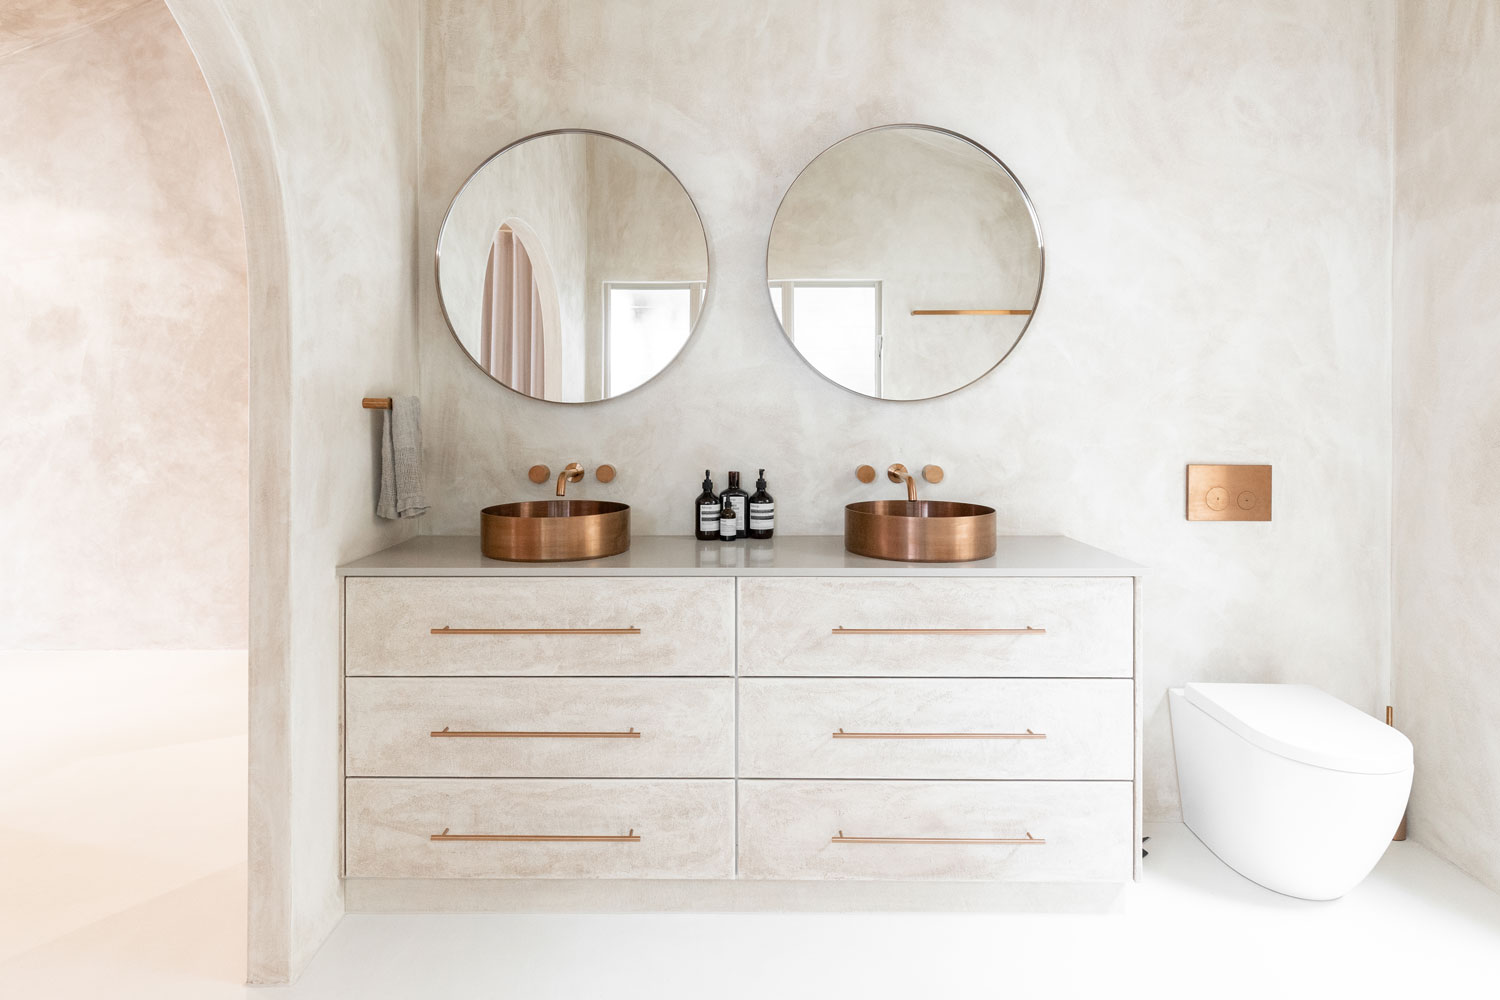 Cohesive bathroom design with round mirrors and matching round basins